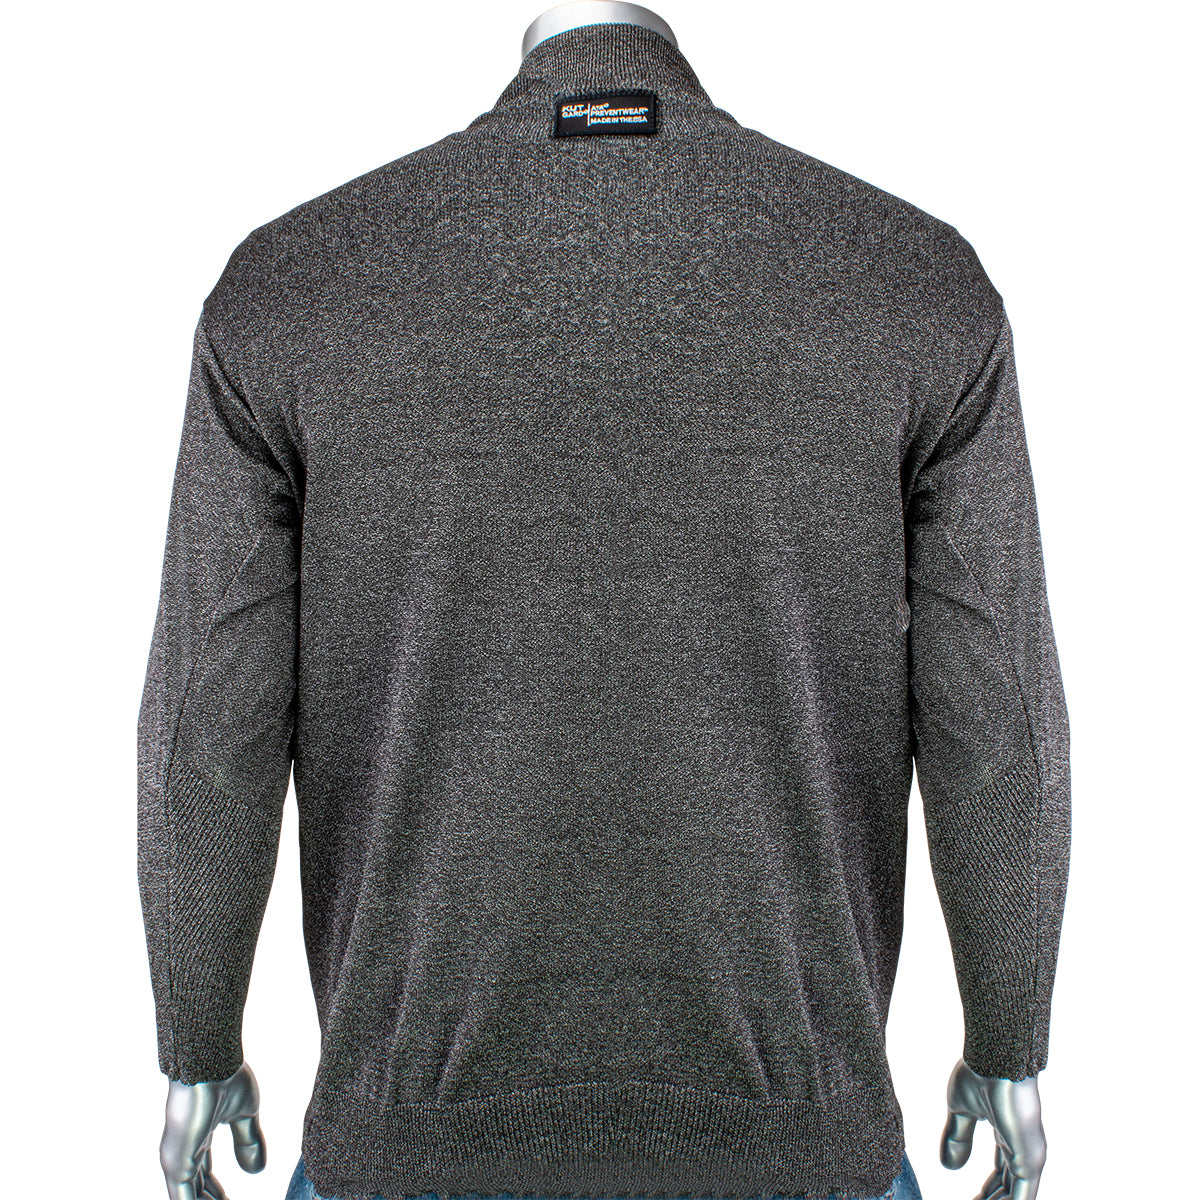 PIP P100SP-XL ATA Blended Cut Resistant Pullover